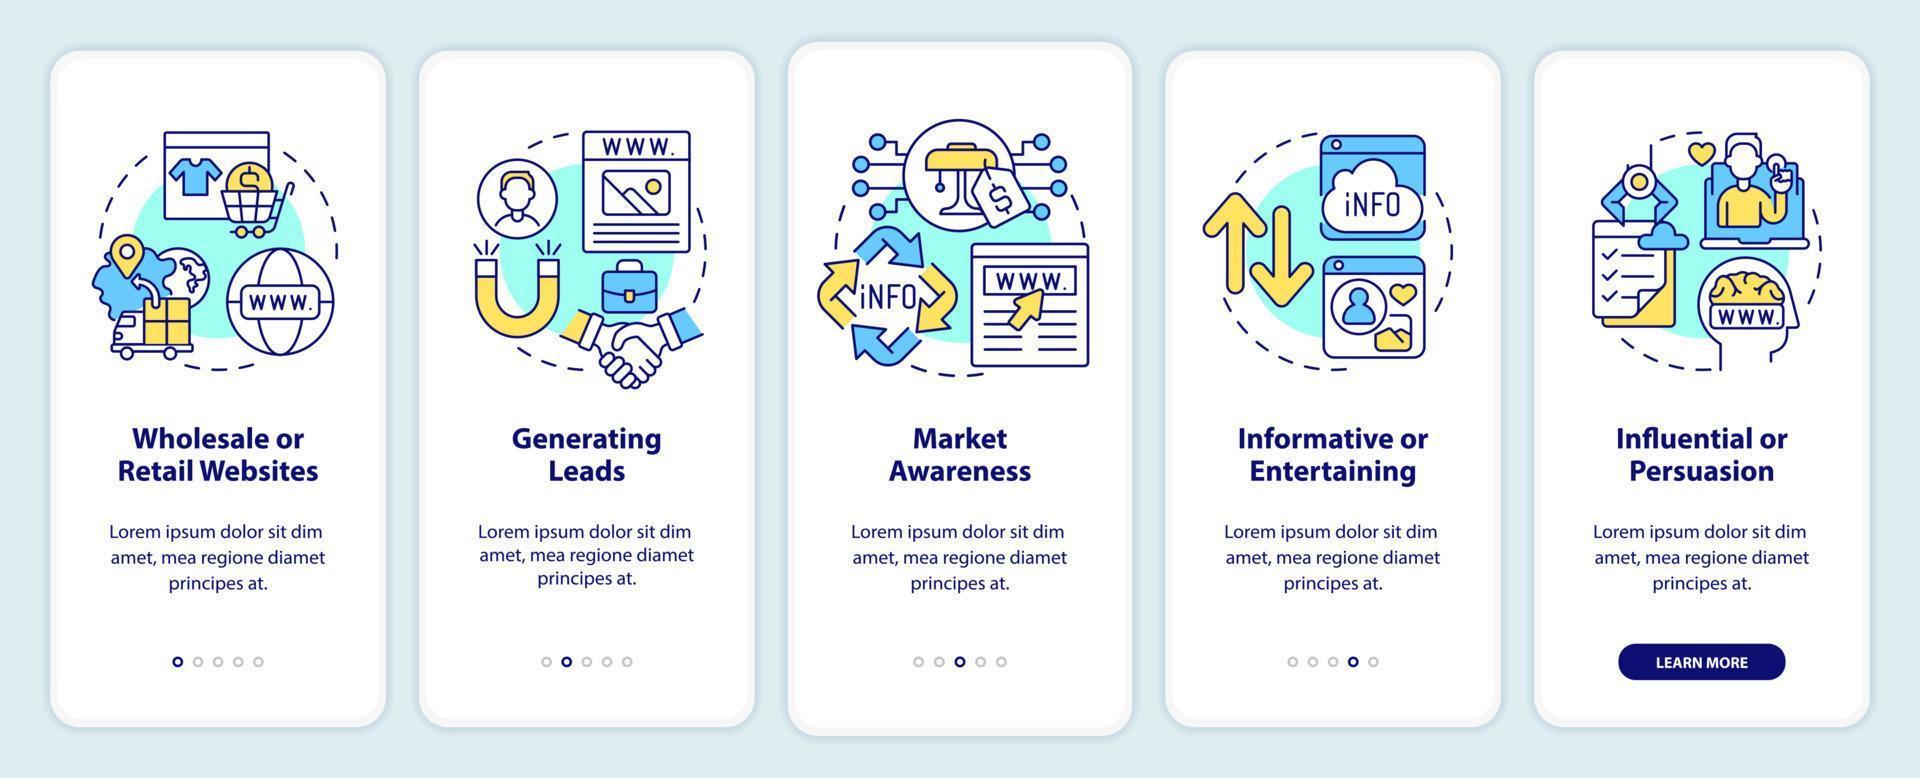 Categories of websites onboarding mobile app screen. Market awareness walkthrough 5 steps editable graphic instructions with linear concepts. UI, UX, GUI template. vector